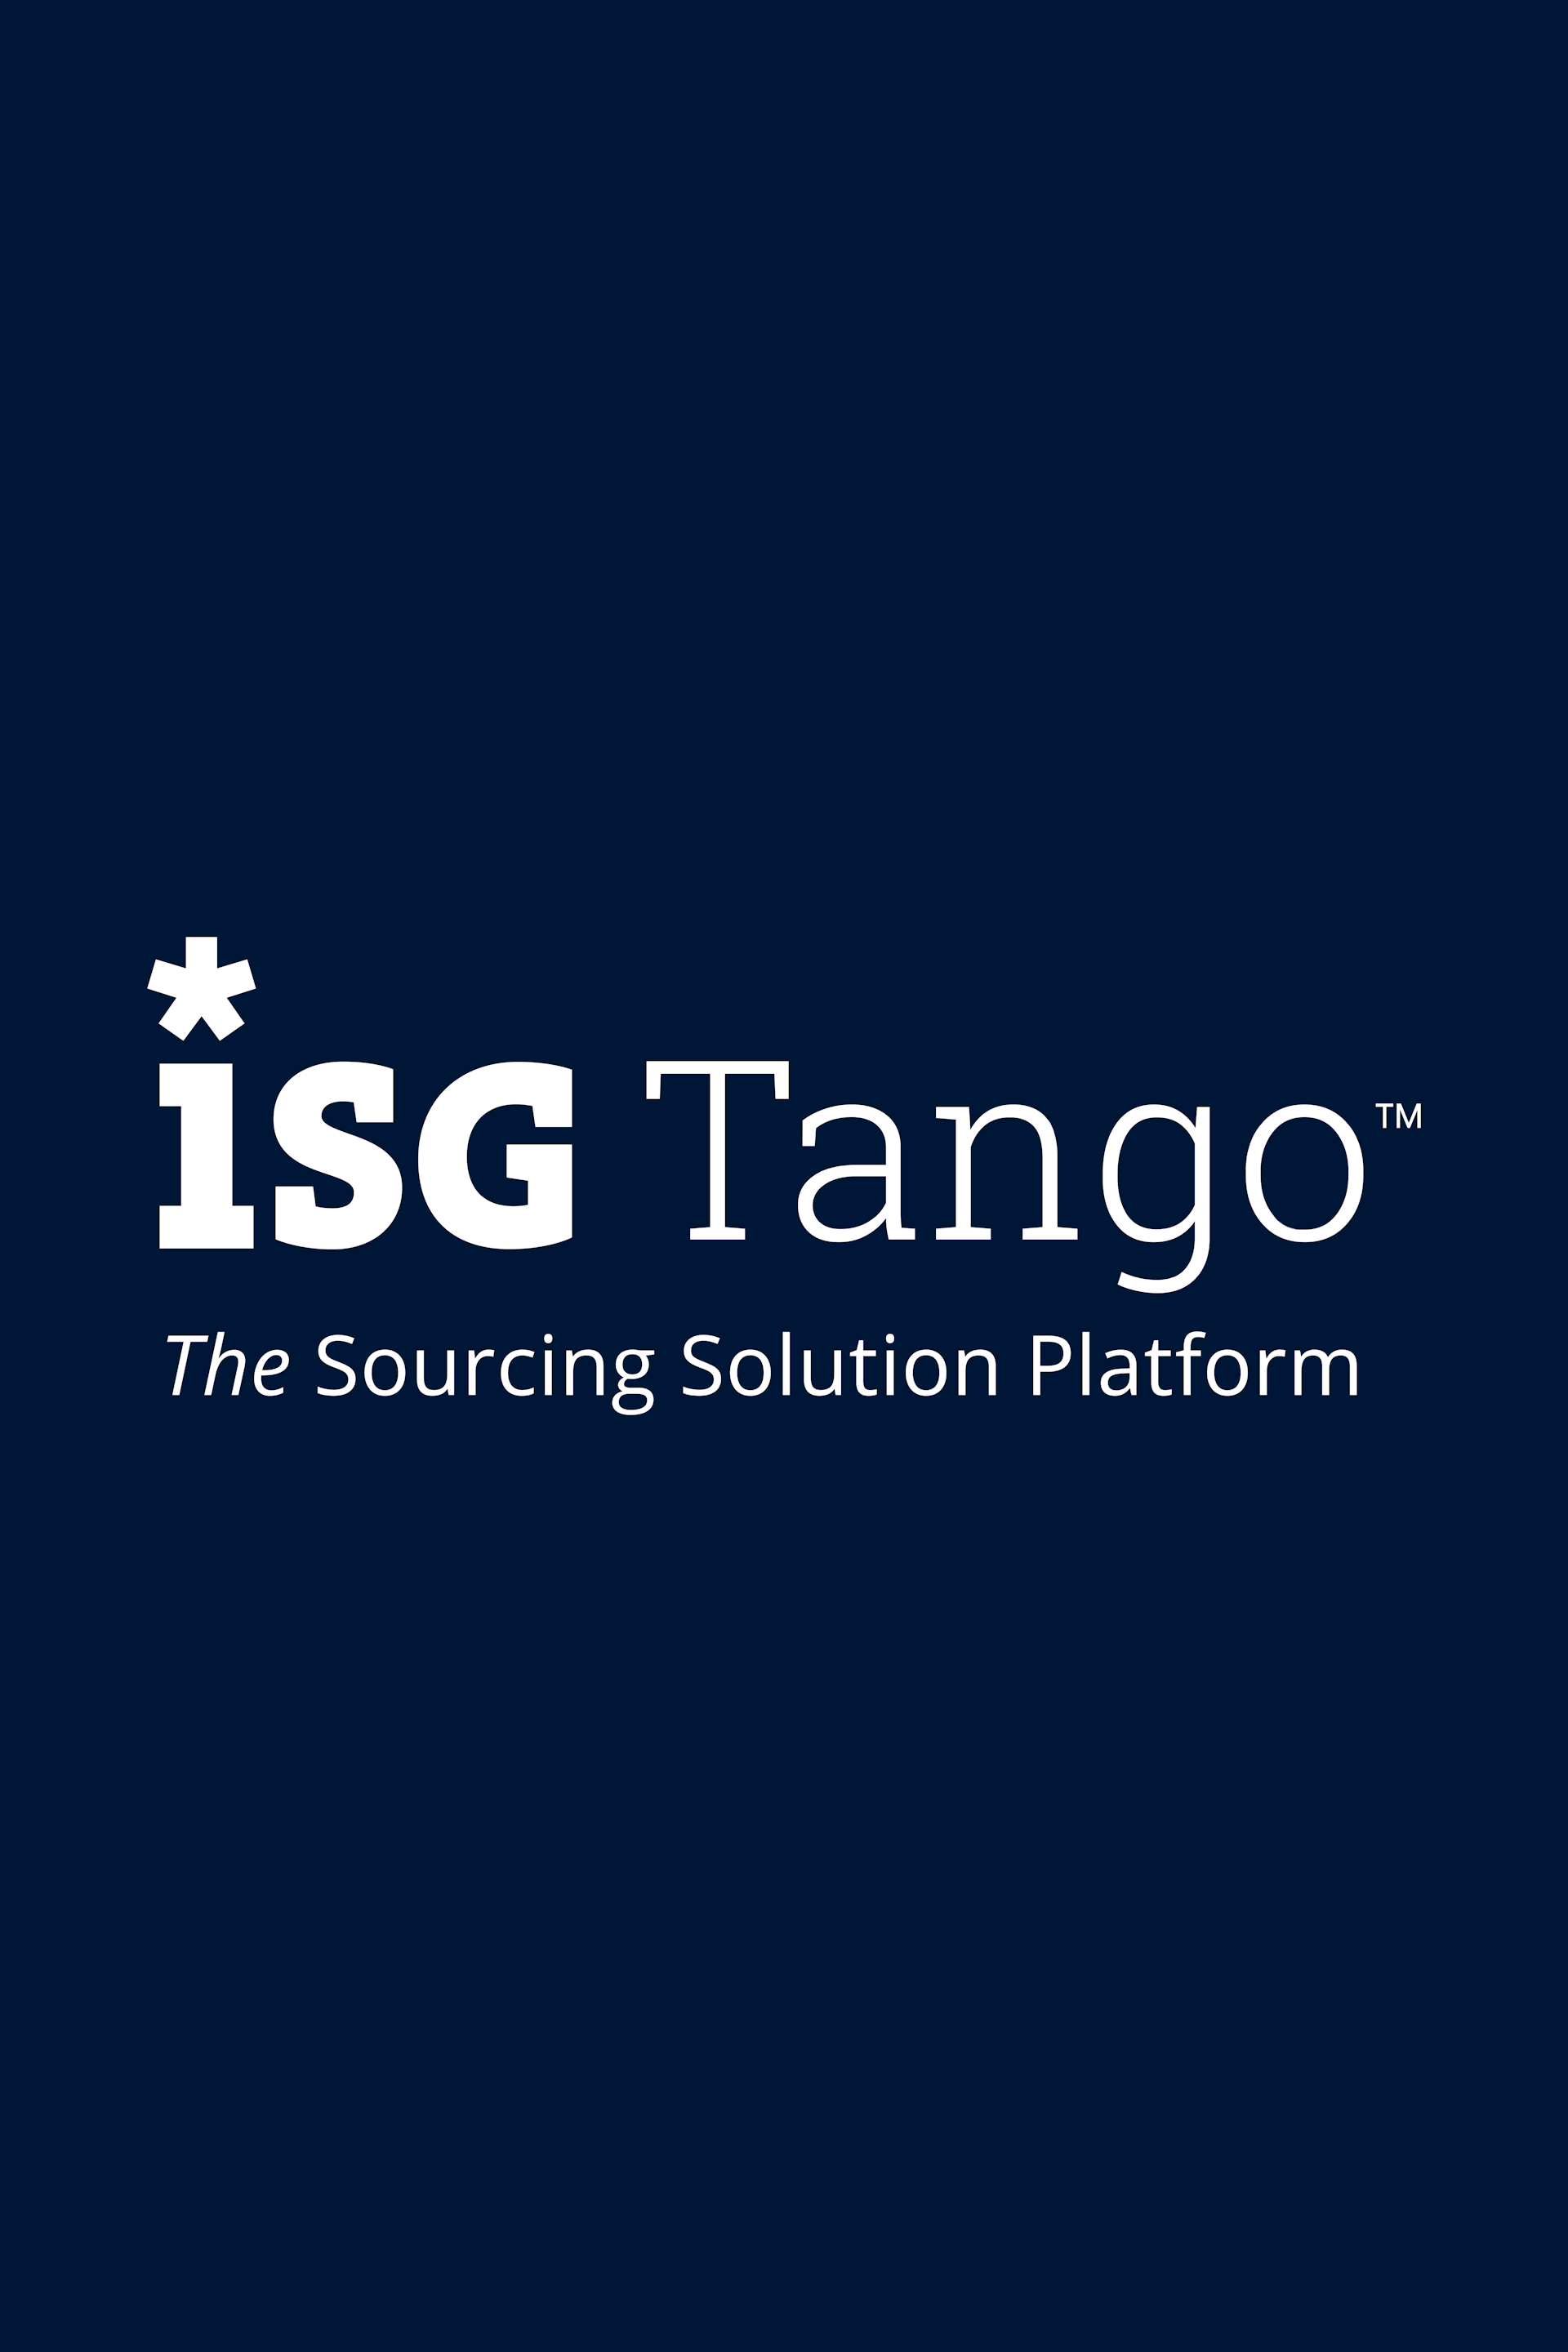 "ISG Tango, The Sourcing Solution Platform" appears in white text on a dark blue background.